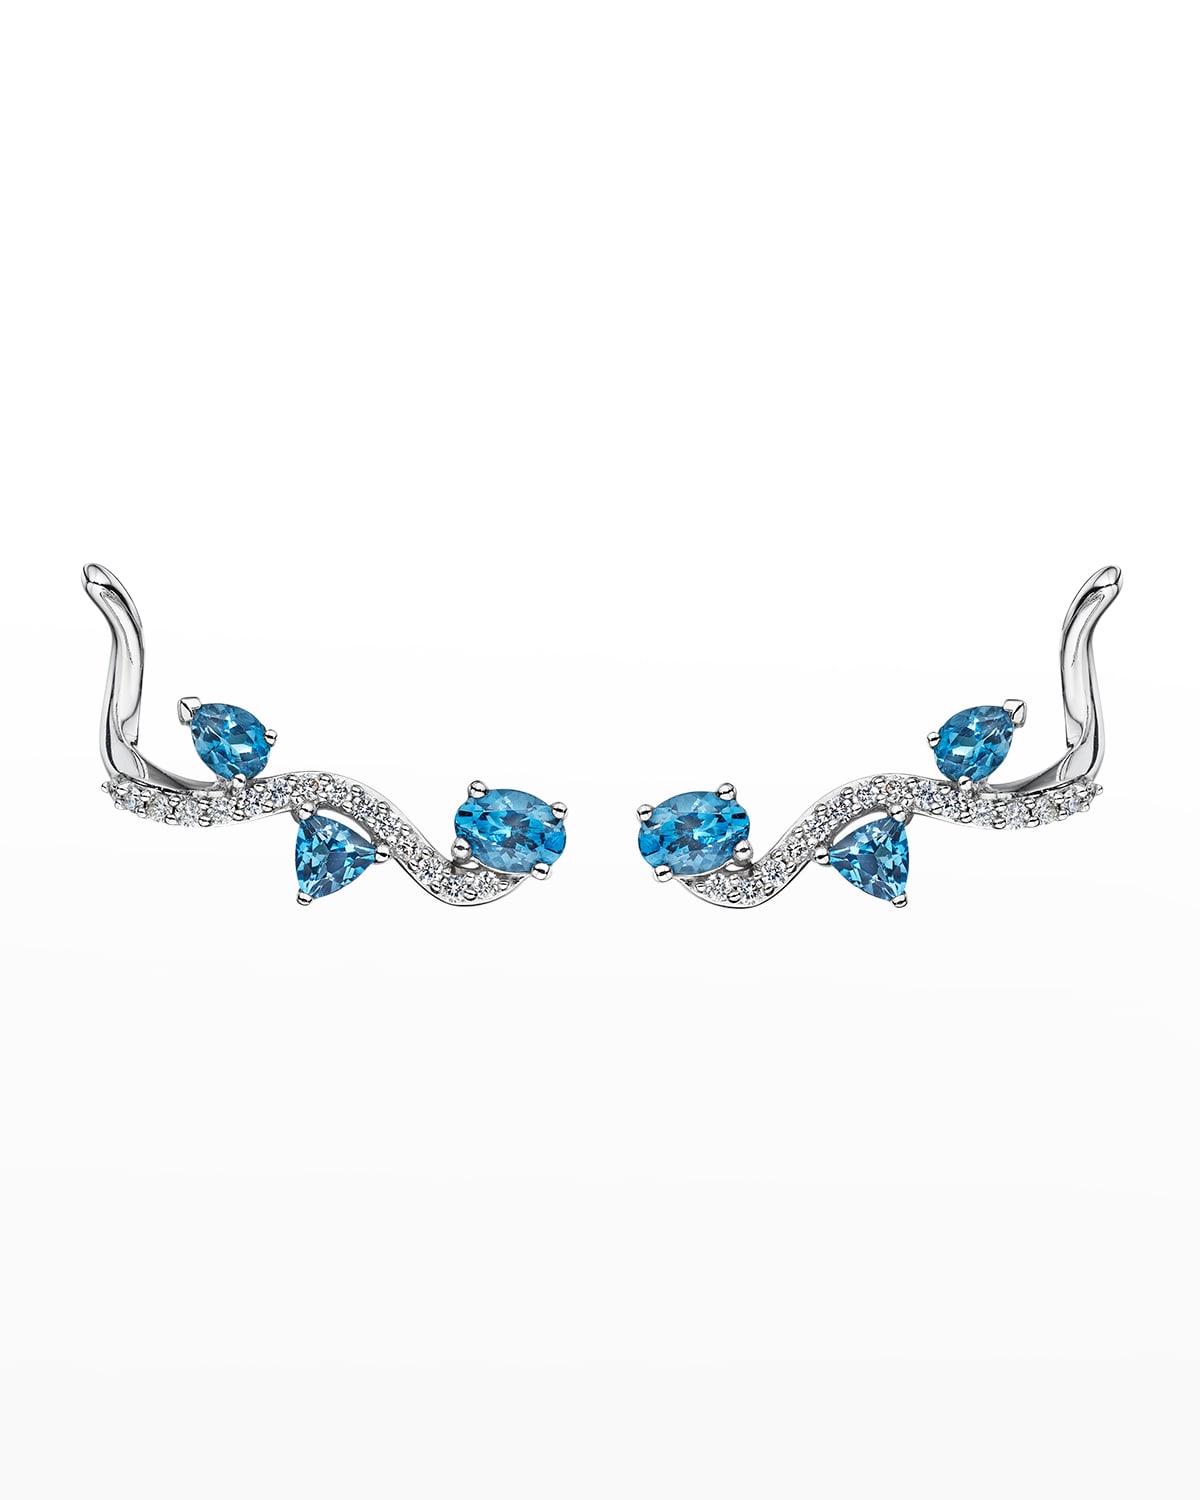 Hueb 18K Mirage White Gold Earrings with VS-GH Diamonds and Blue Topaz